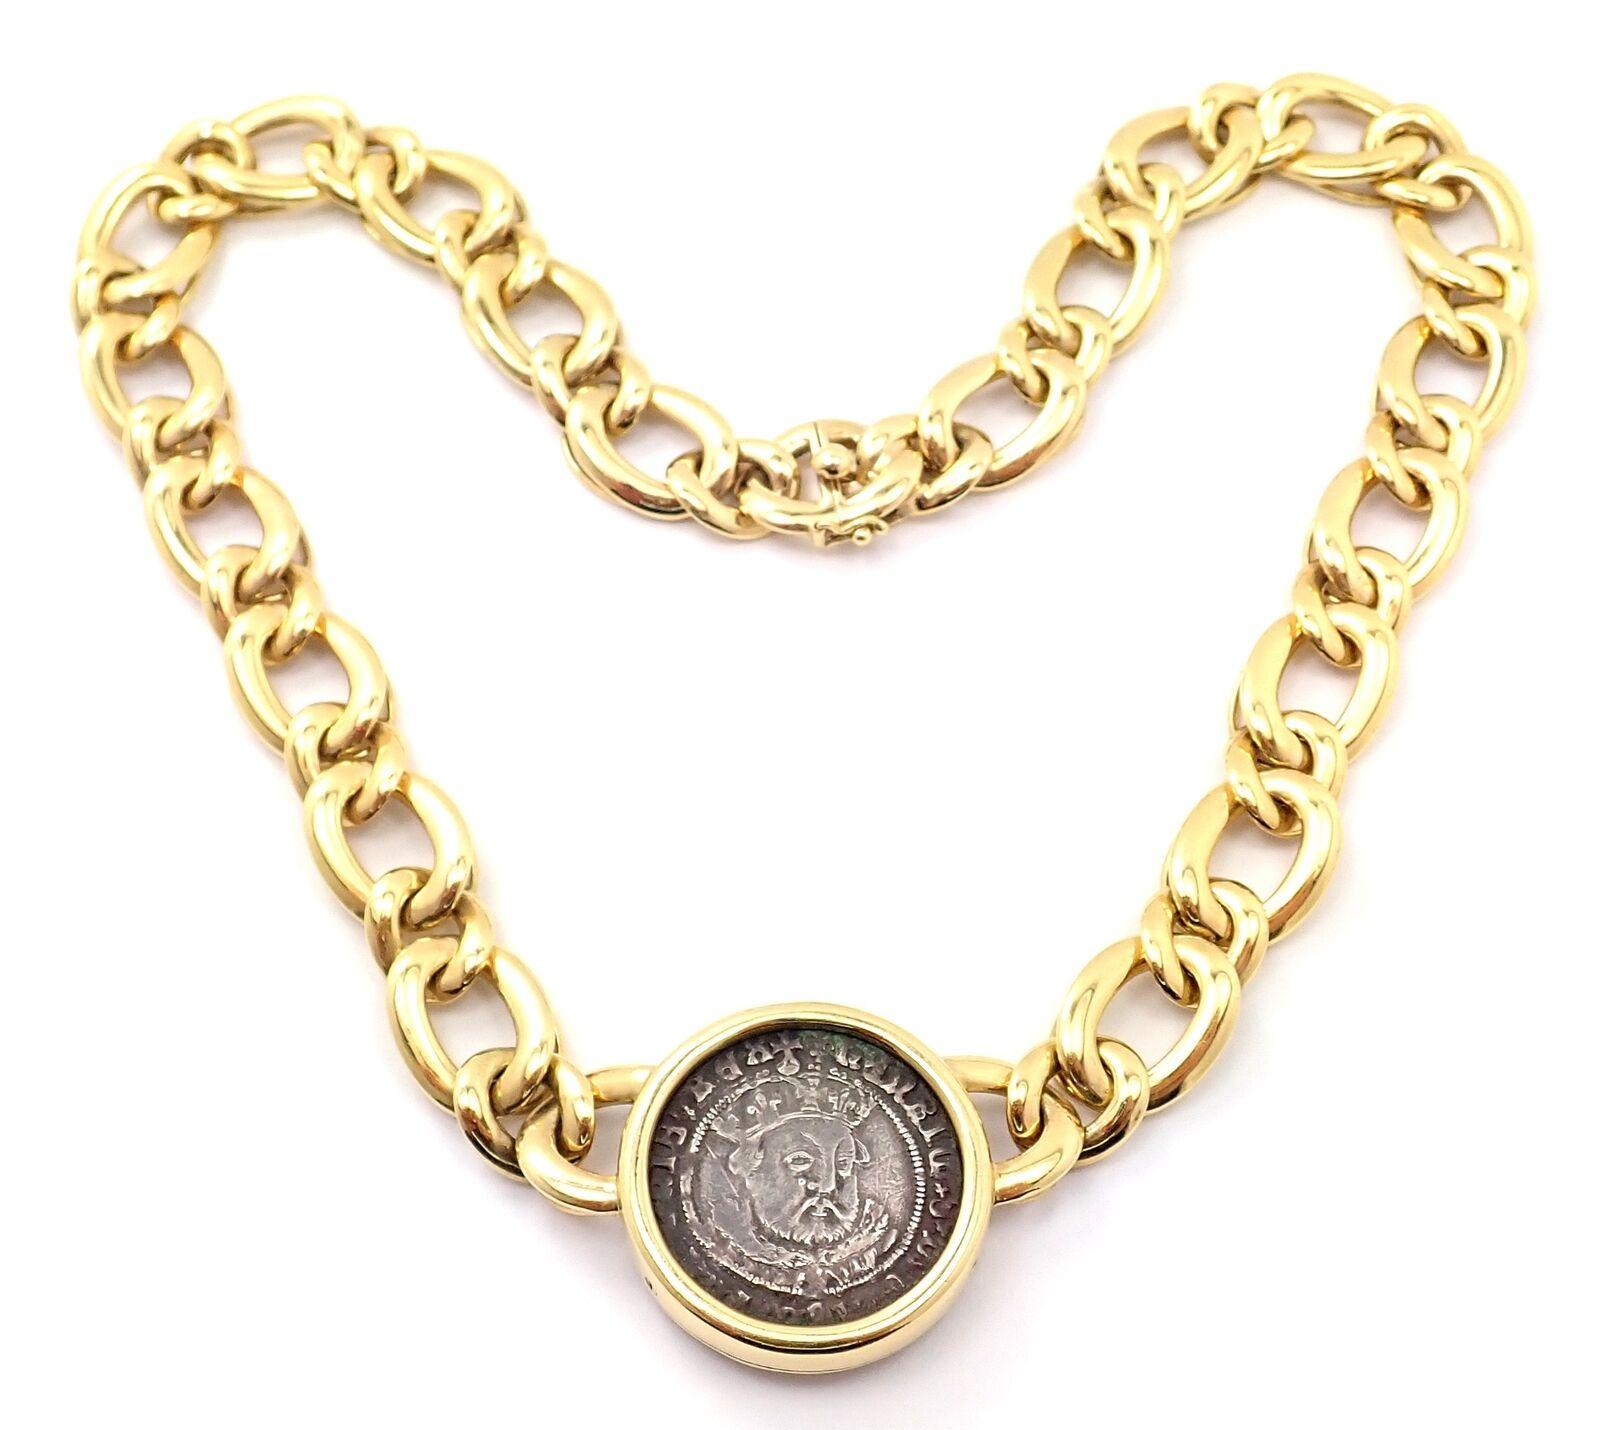 18k yellow gold ancient coin, link chain Monete necklace by Bulgari.
Details: 
Length: Necklace is 16